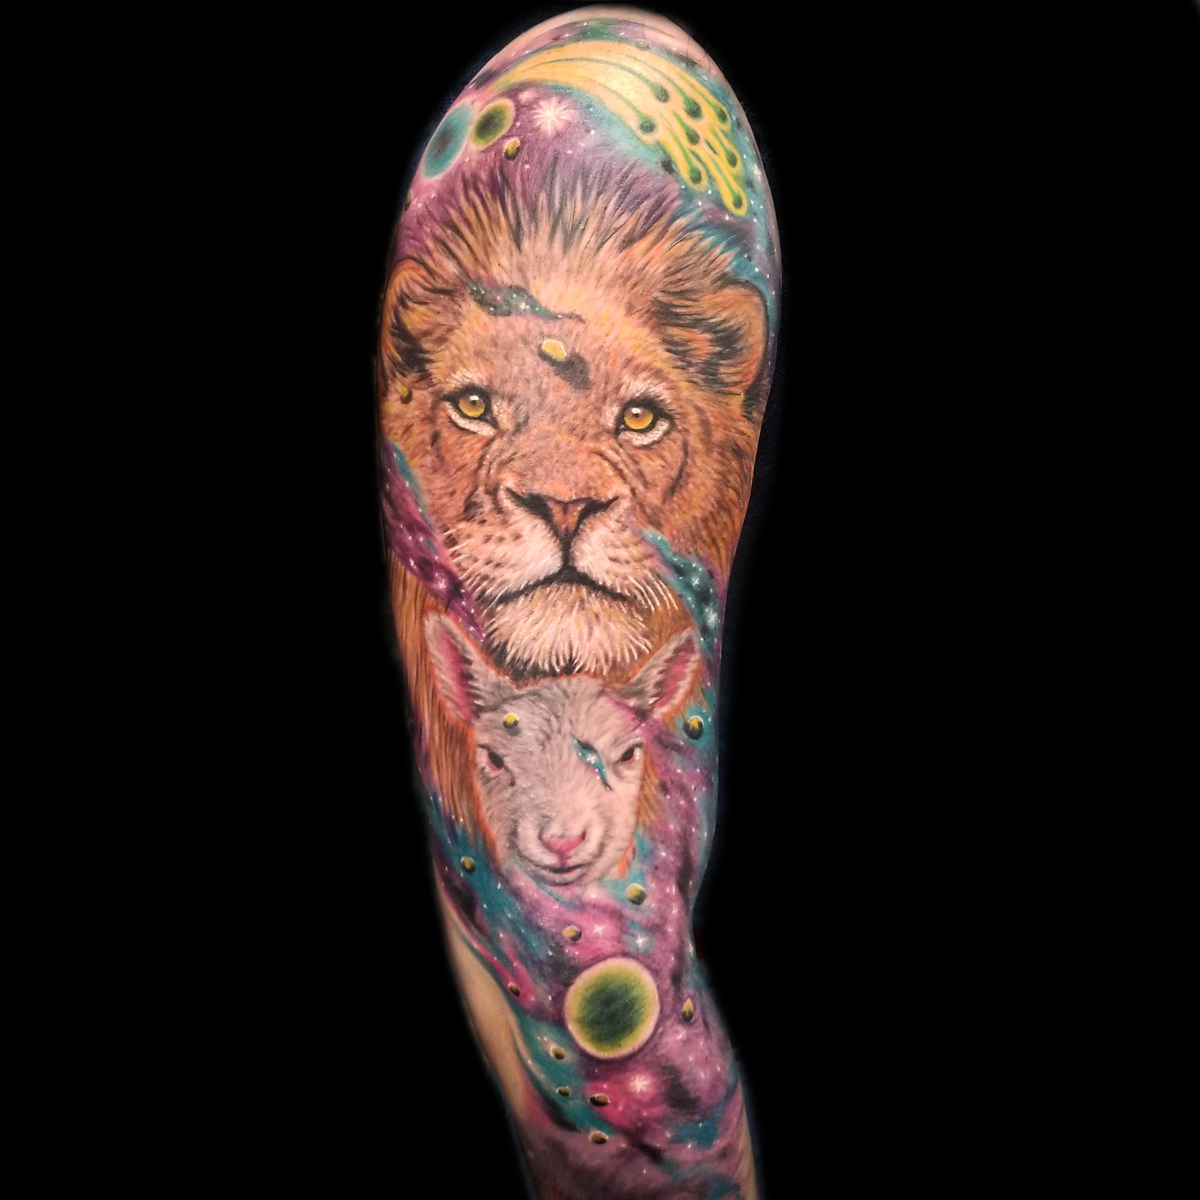 Swansea Tattoo Lab - Indian girl in lion headdress by Mike | Facebook